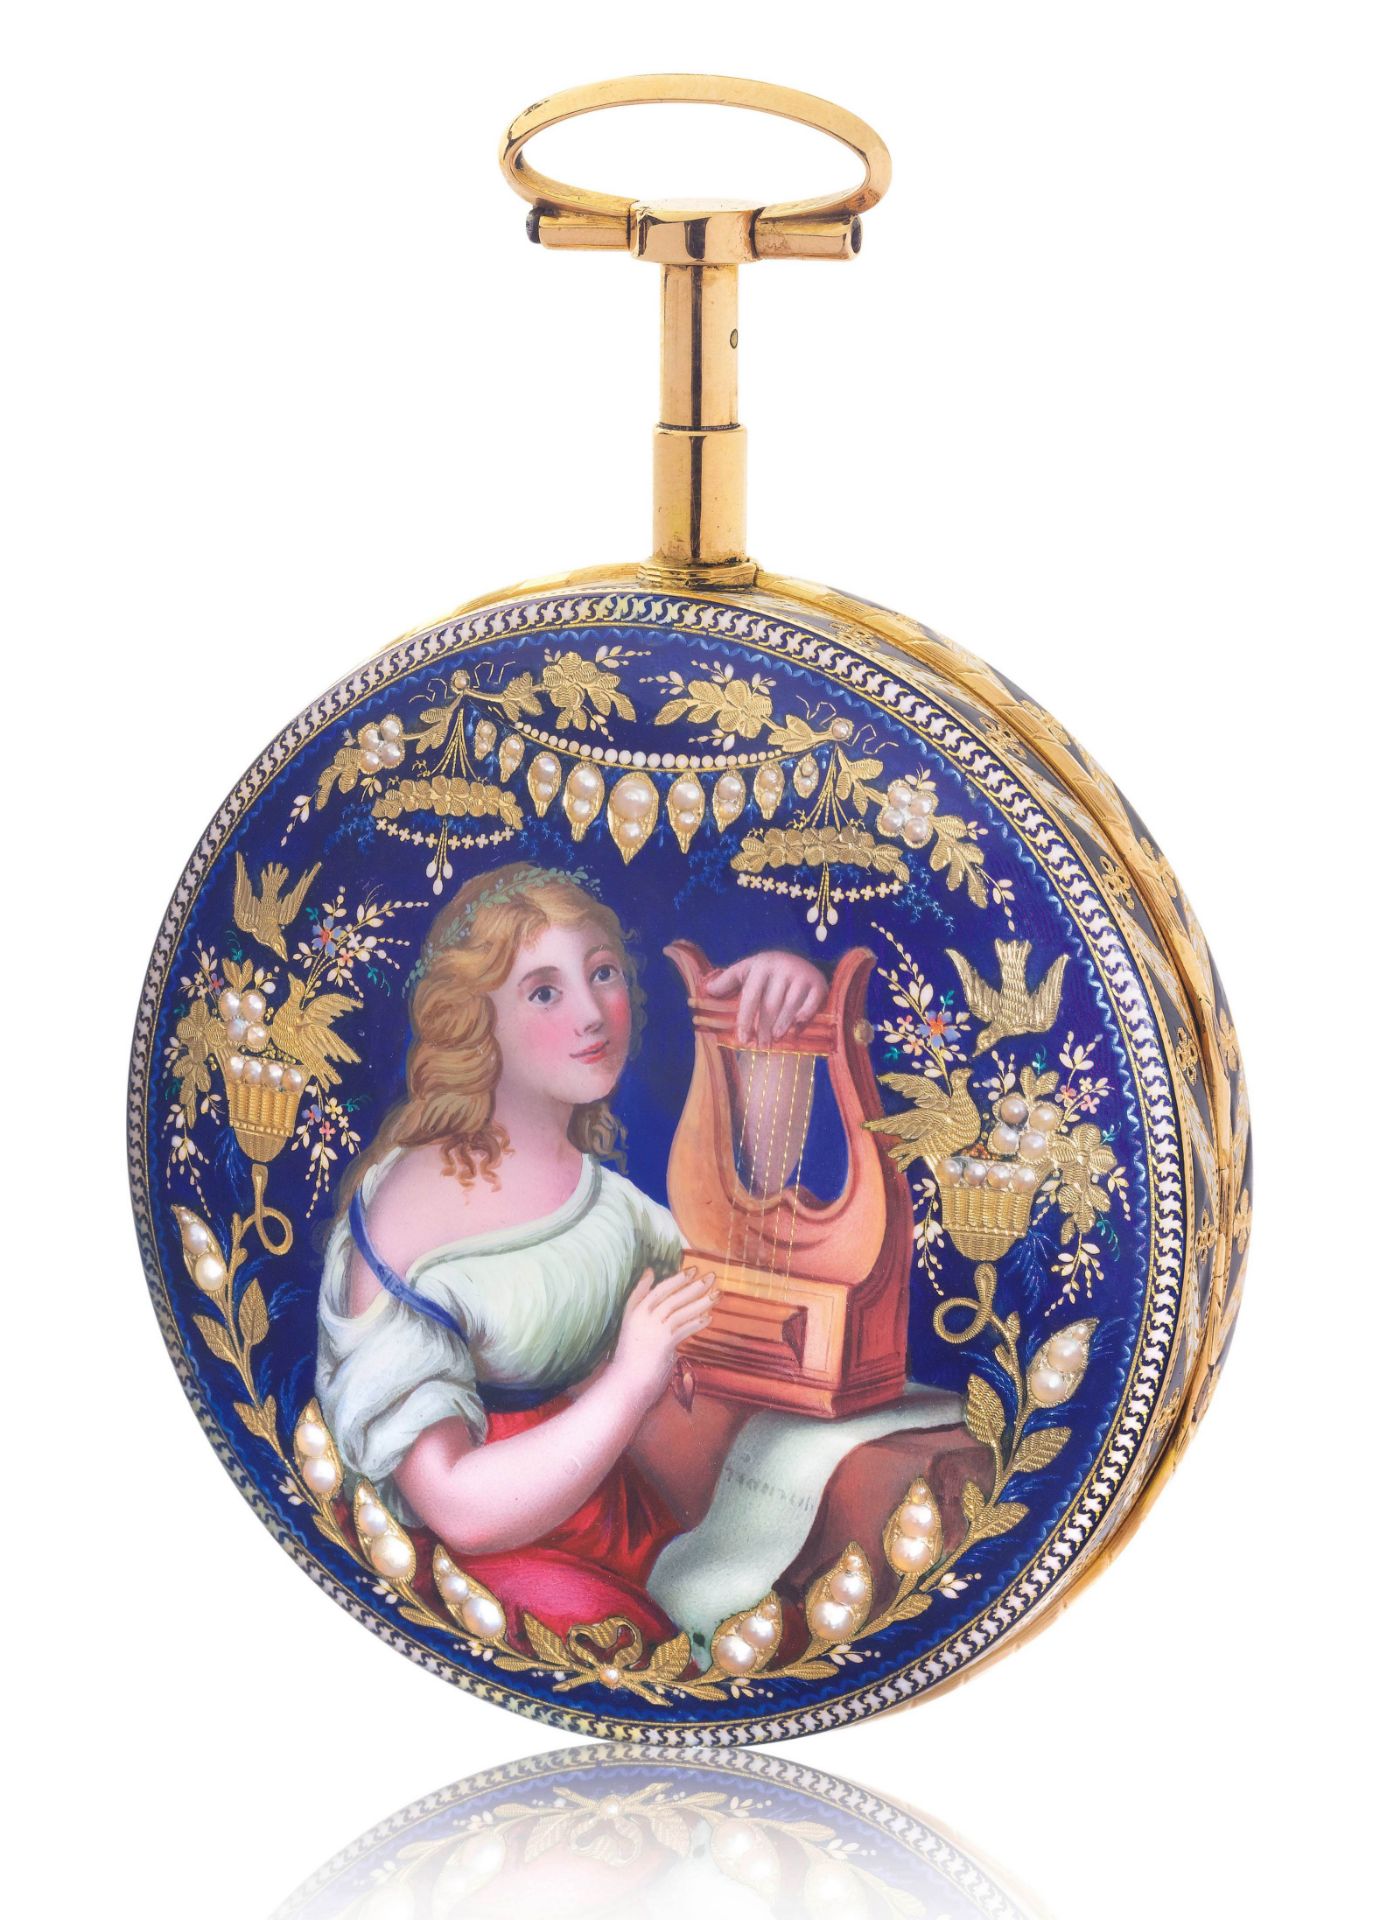 Veigneur Frères, extremely rare and large gold enamel pocket watch with 1/4-repeater and automation, - Image 2 of 4